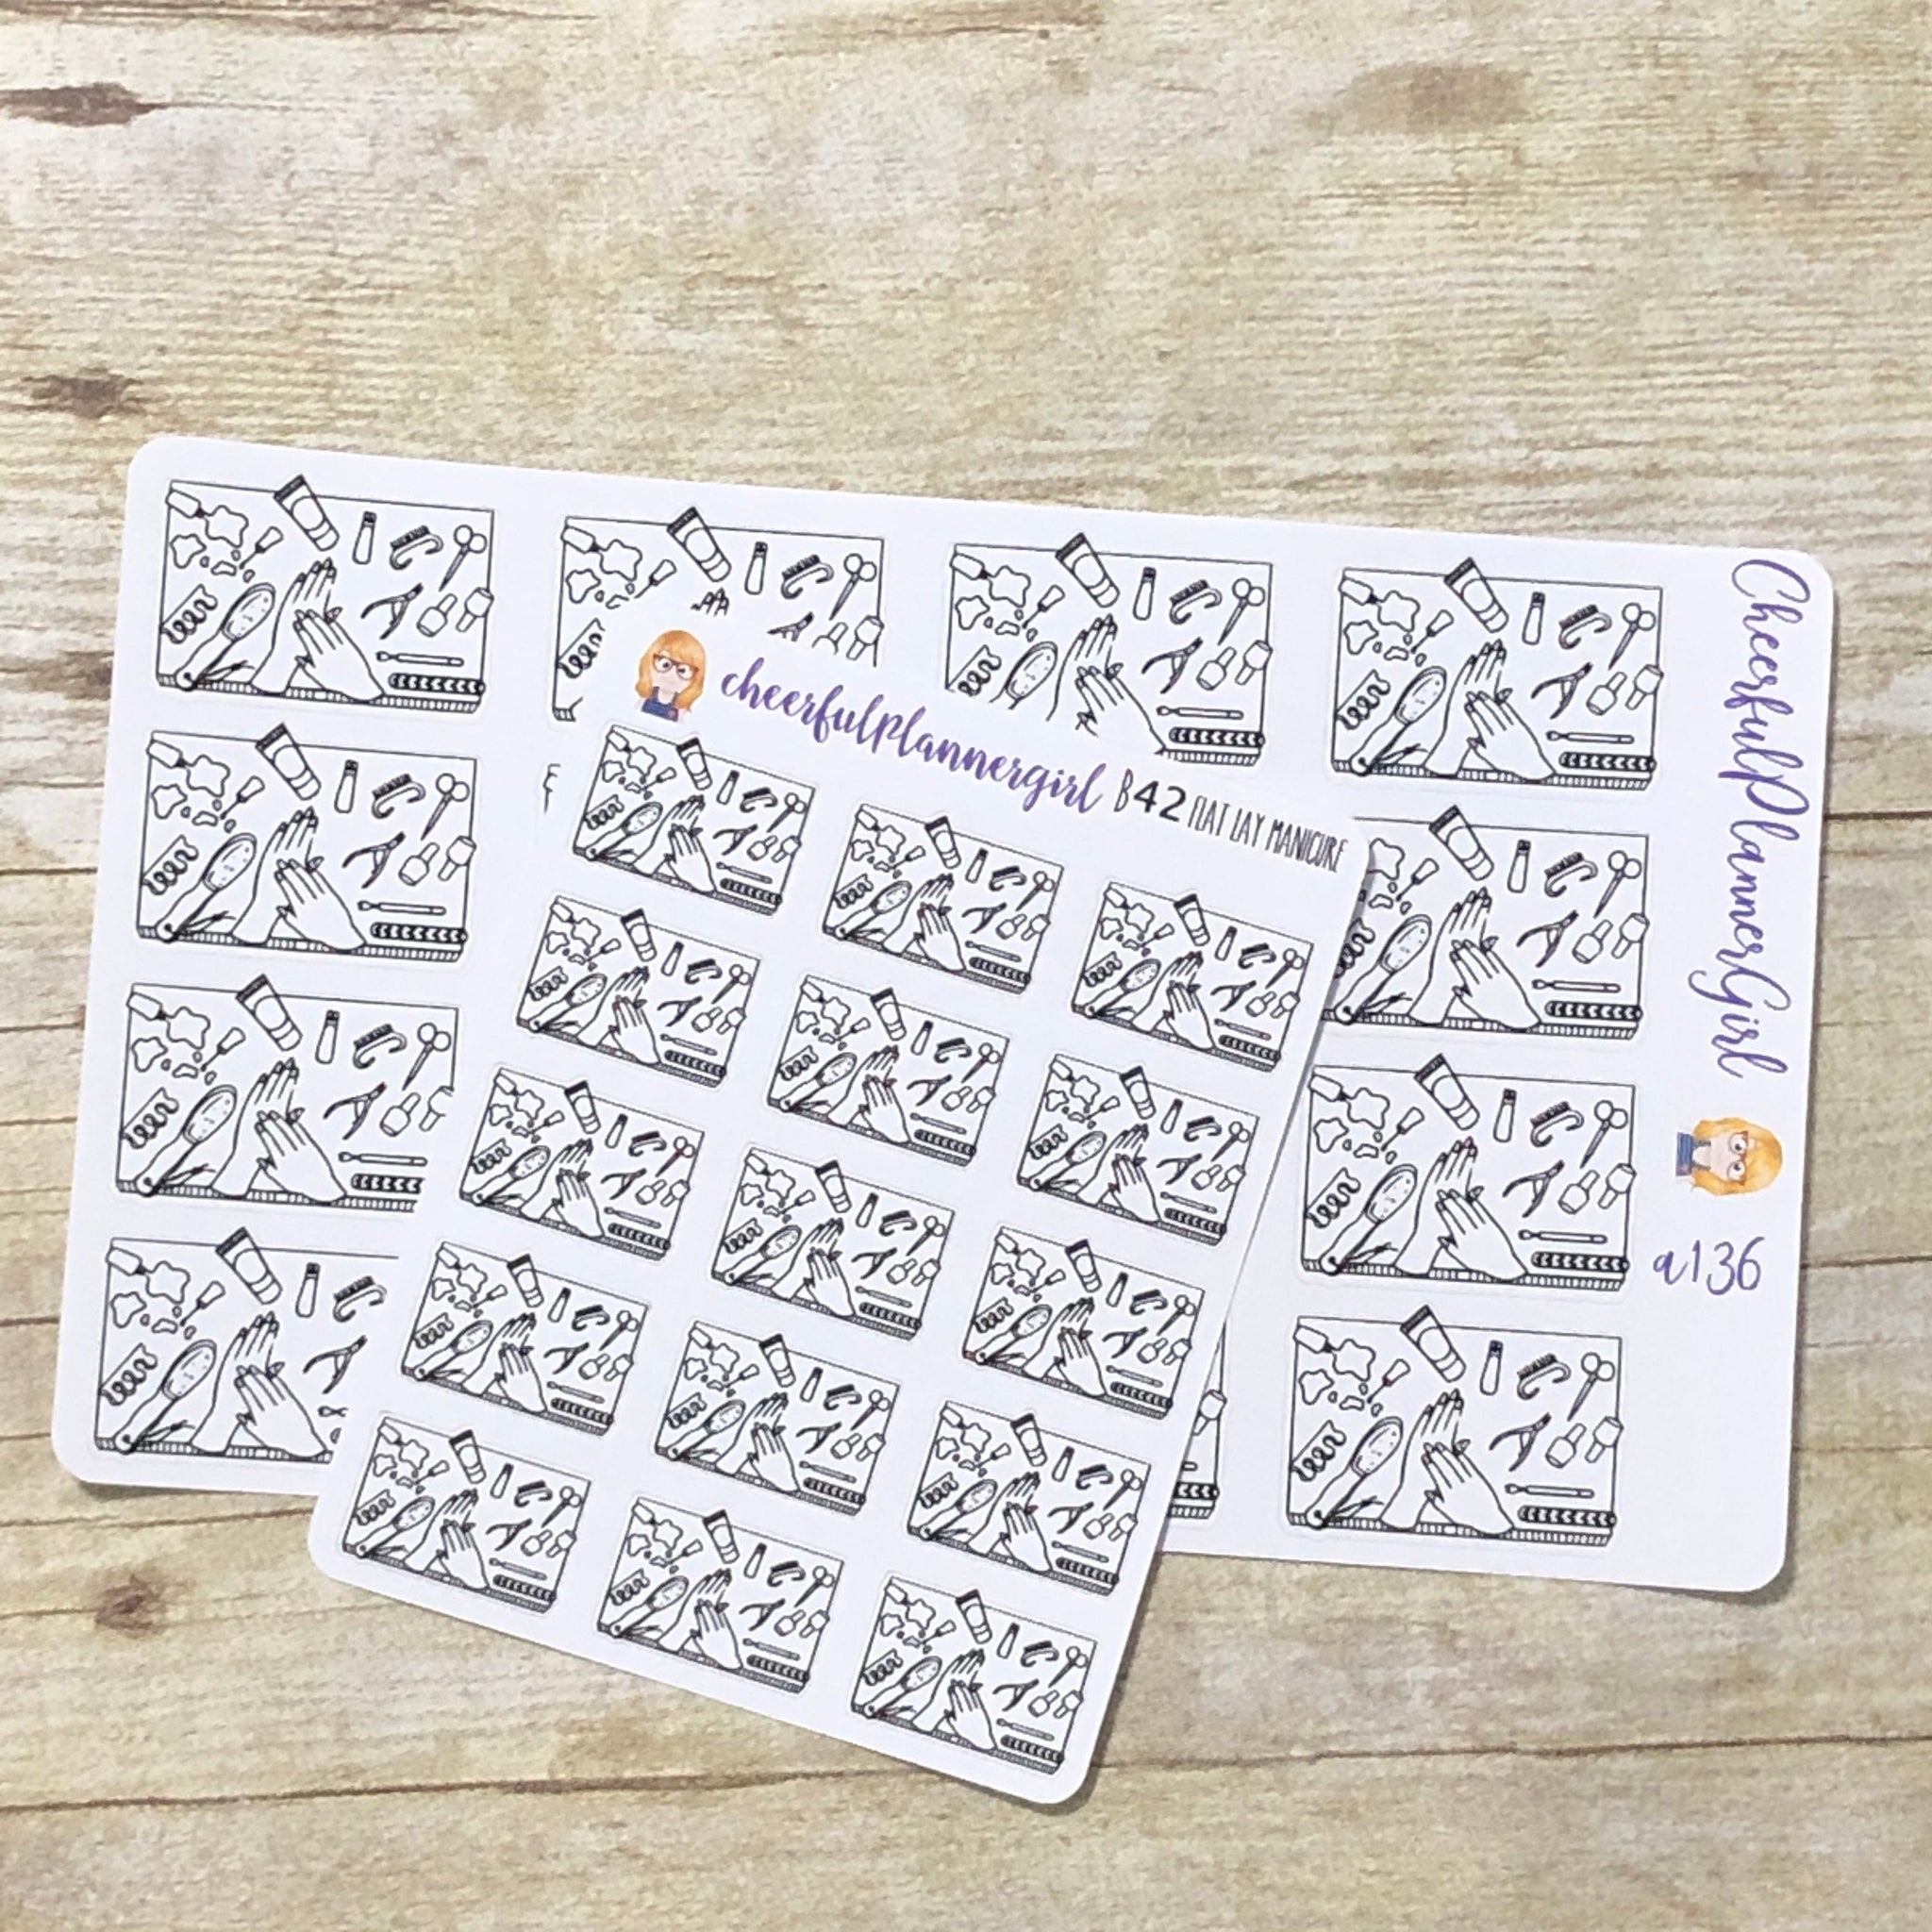 Manicure Flat Lay Planner Stickers